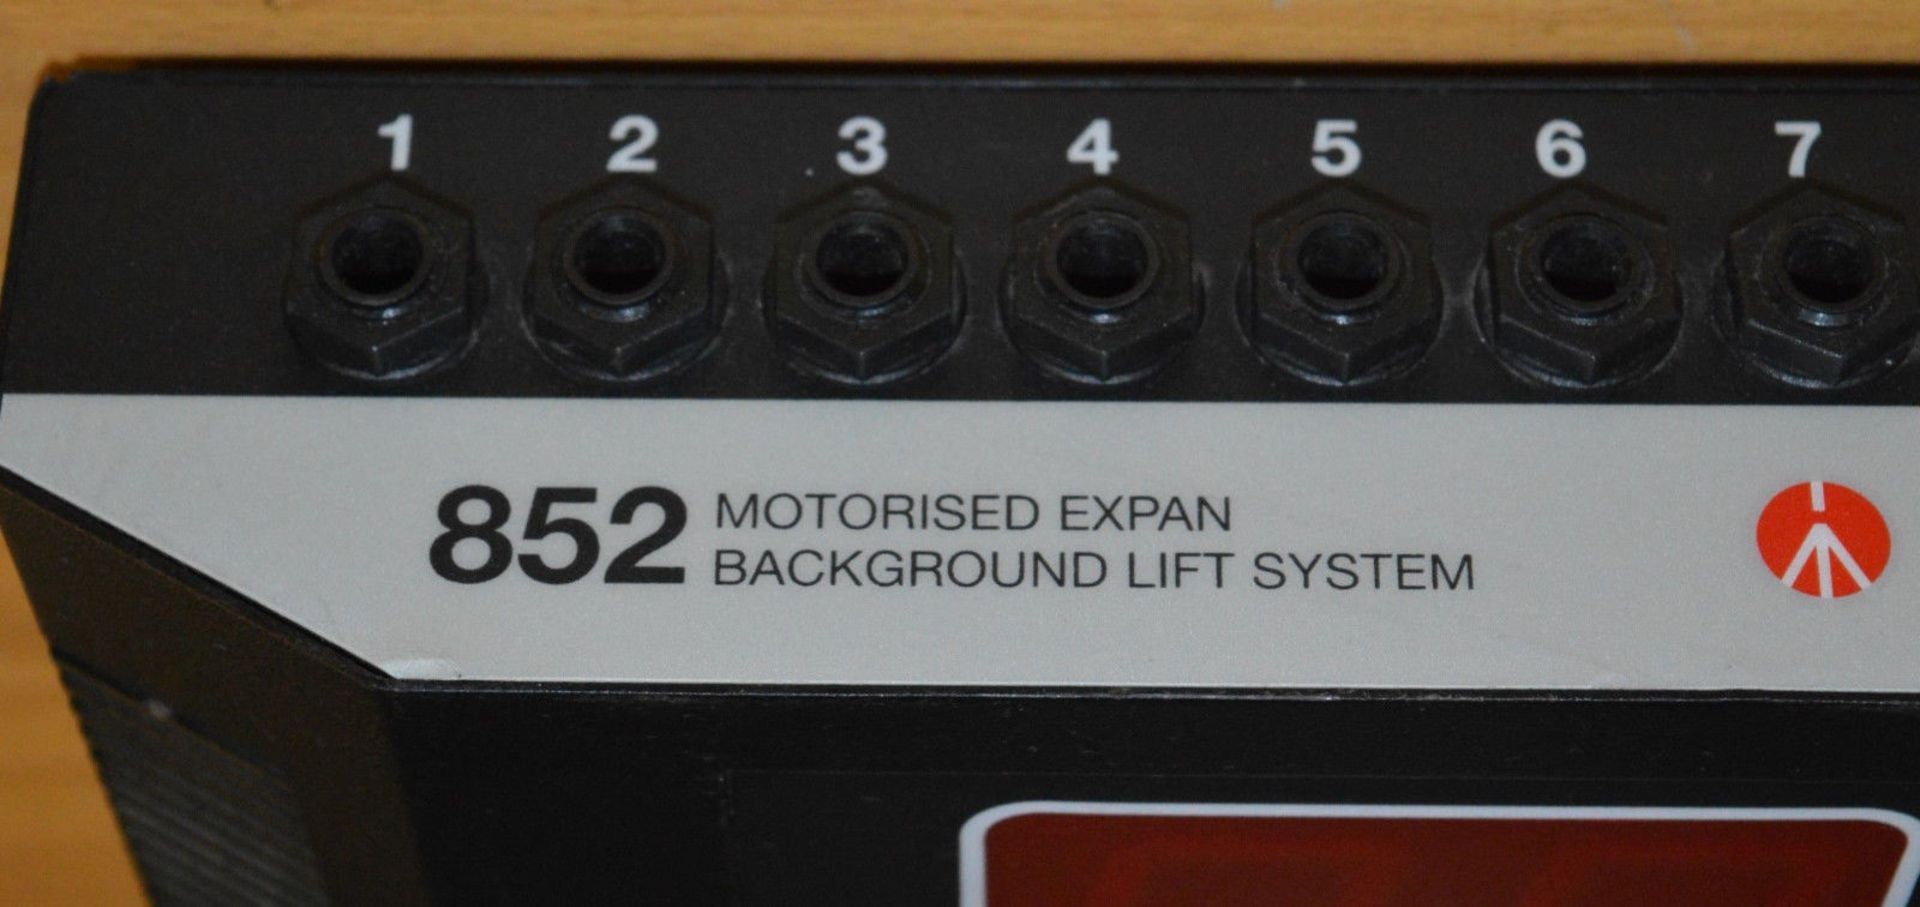 1 x Manfrotto 852 Motorised Expan Photography Background Lift System - Ideal for use in - Image 3 of 6